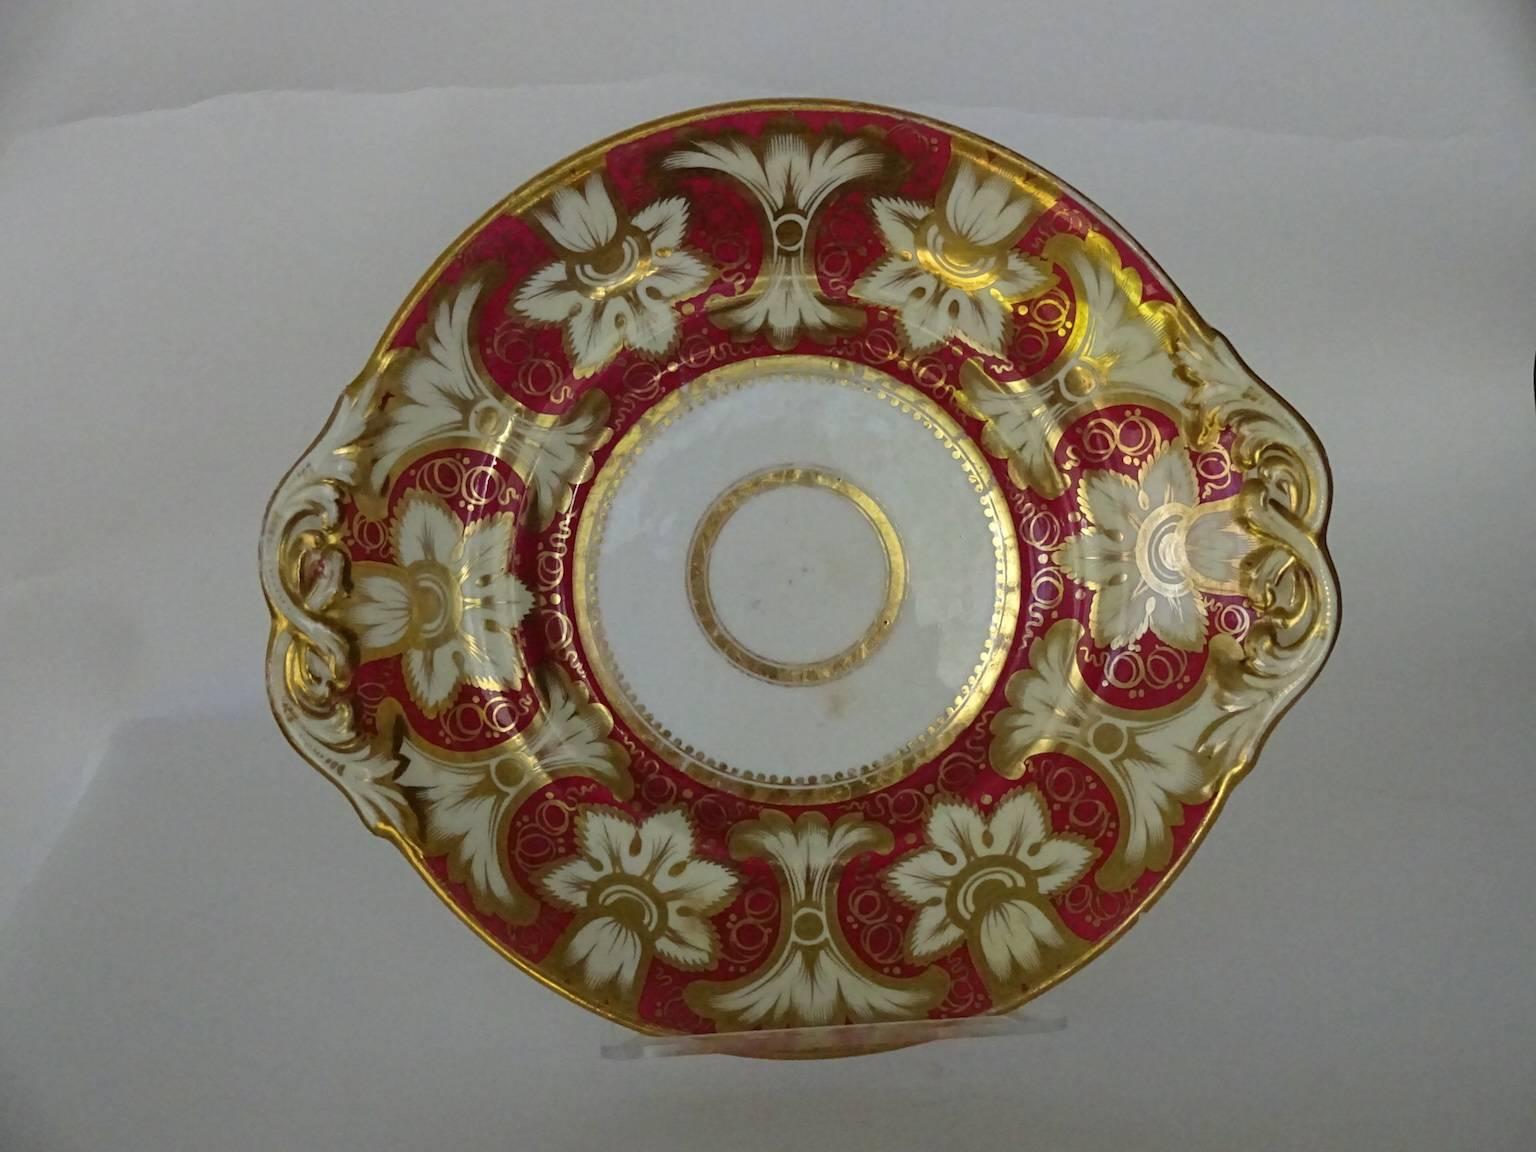 red and gold plates